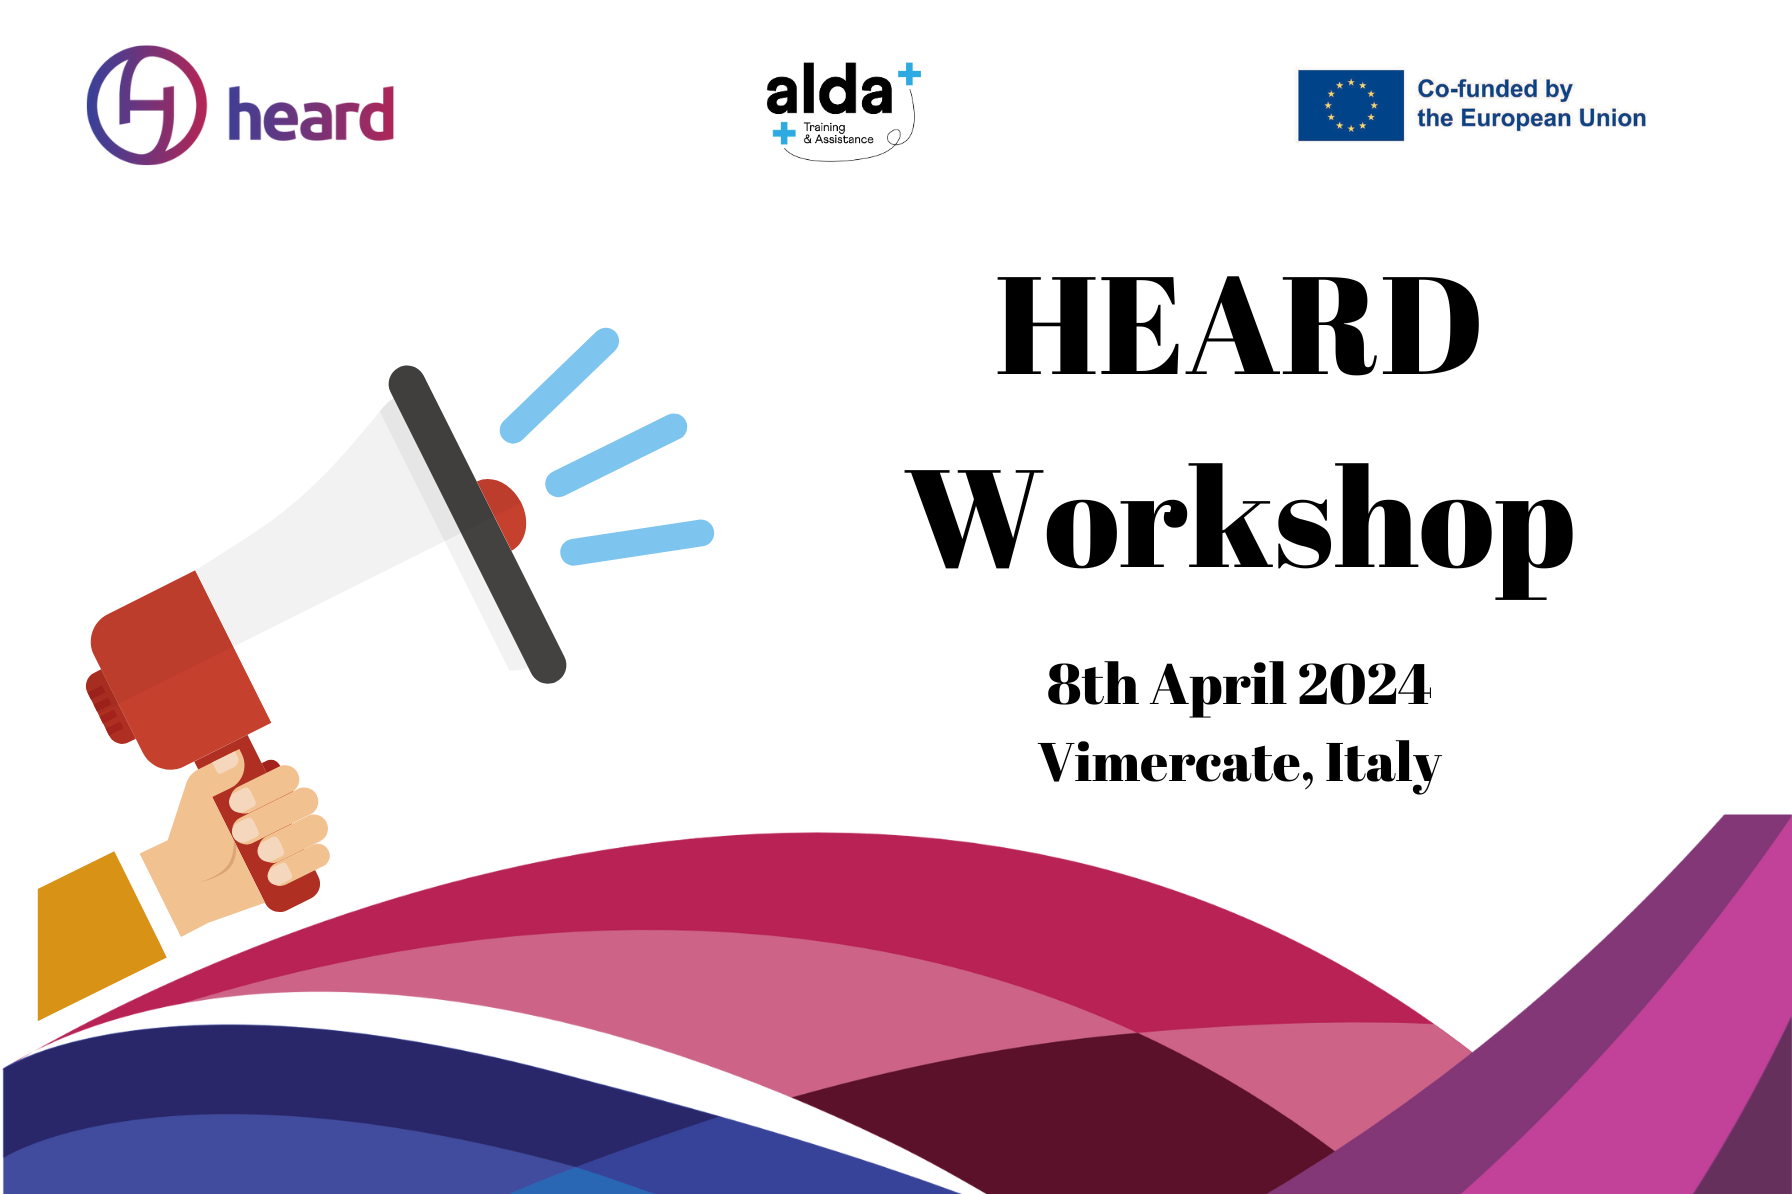 HEARD Workshop - Technical Assistance from ALDA+ to Municipality of Vimercate. 